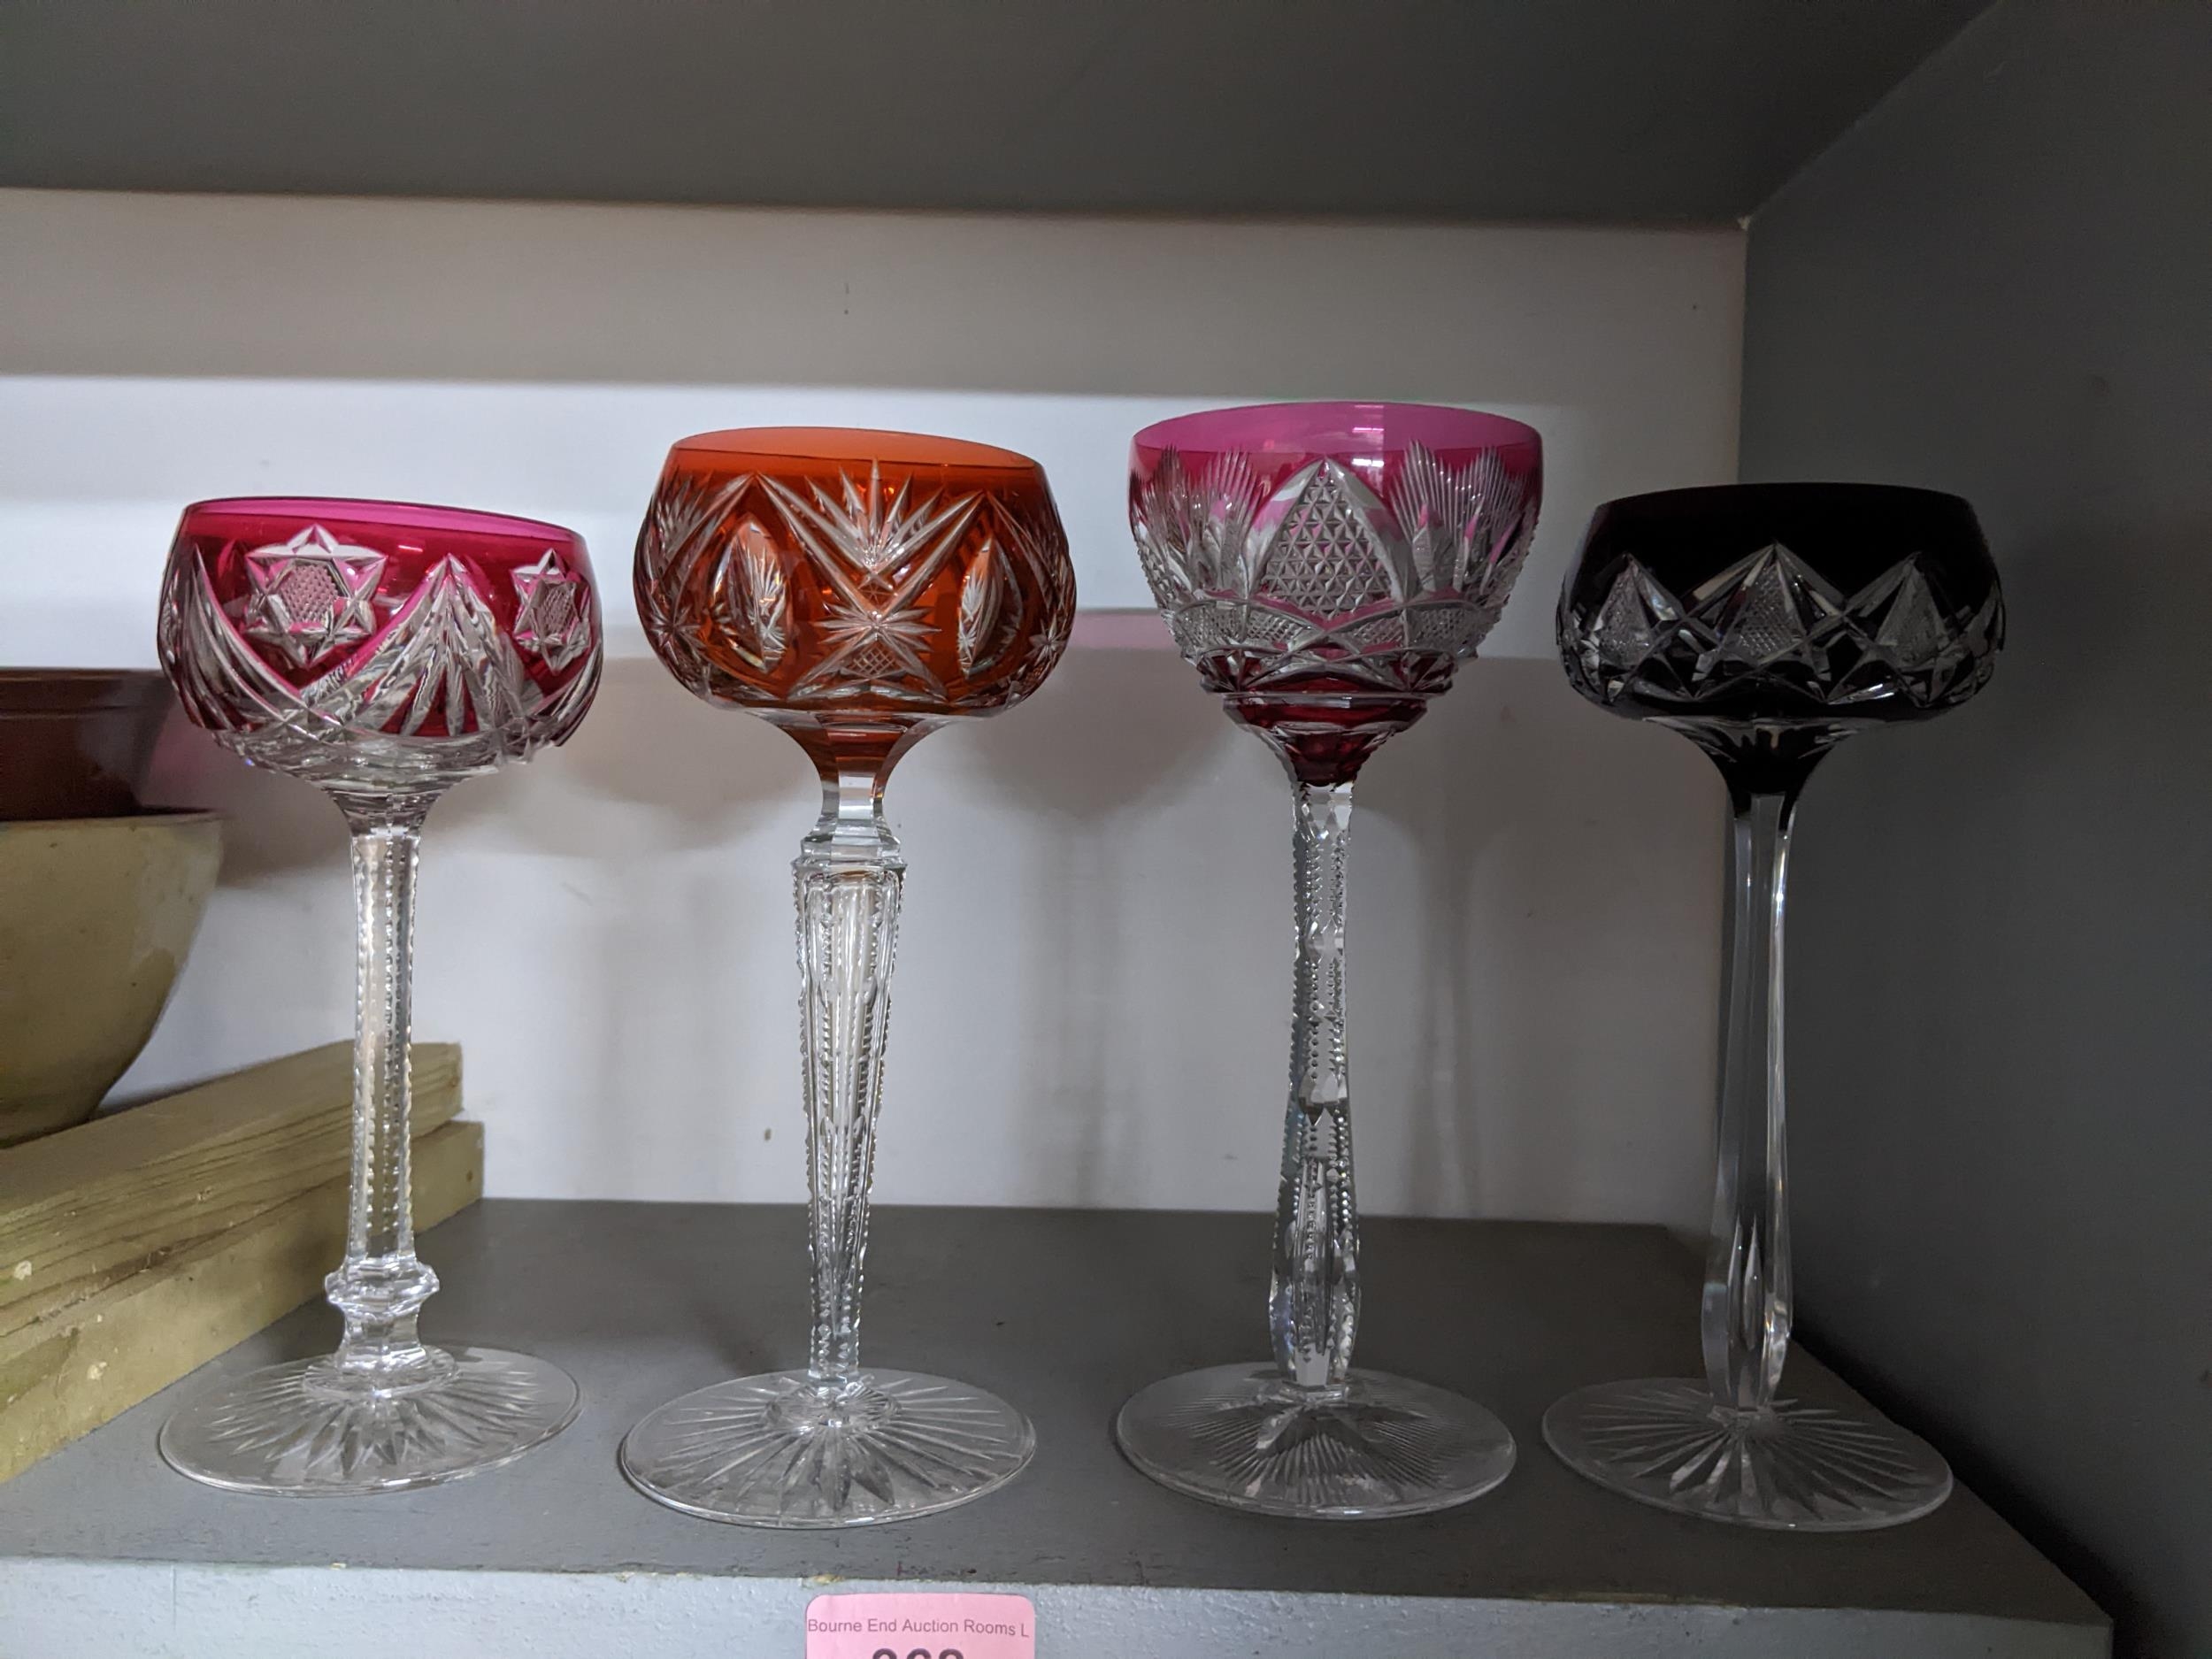 A group of four cut glass and overlaid hock glasses, each with different coloured bowls and patterns